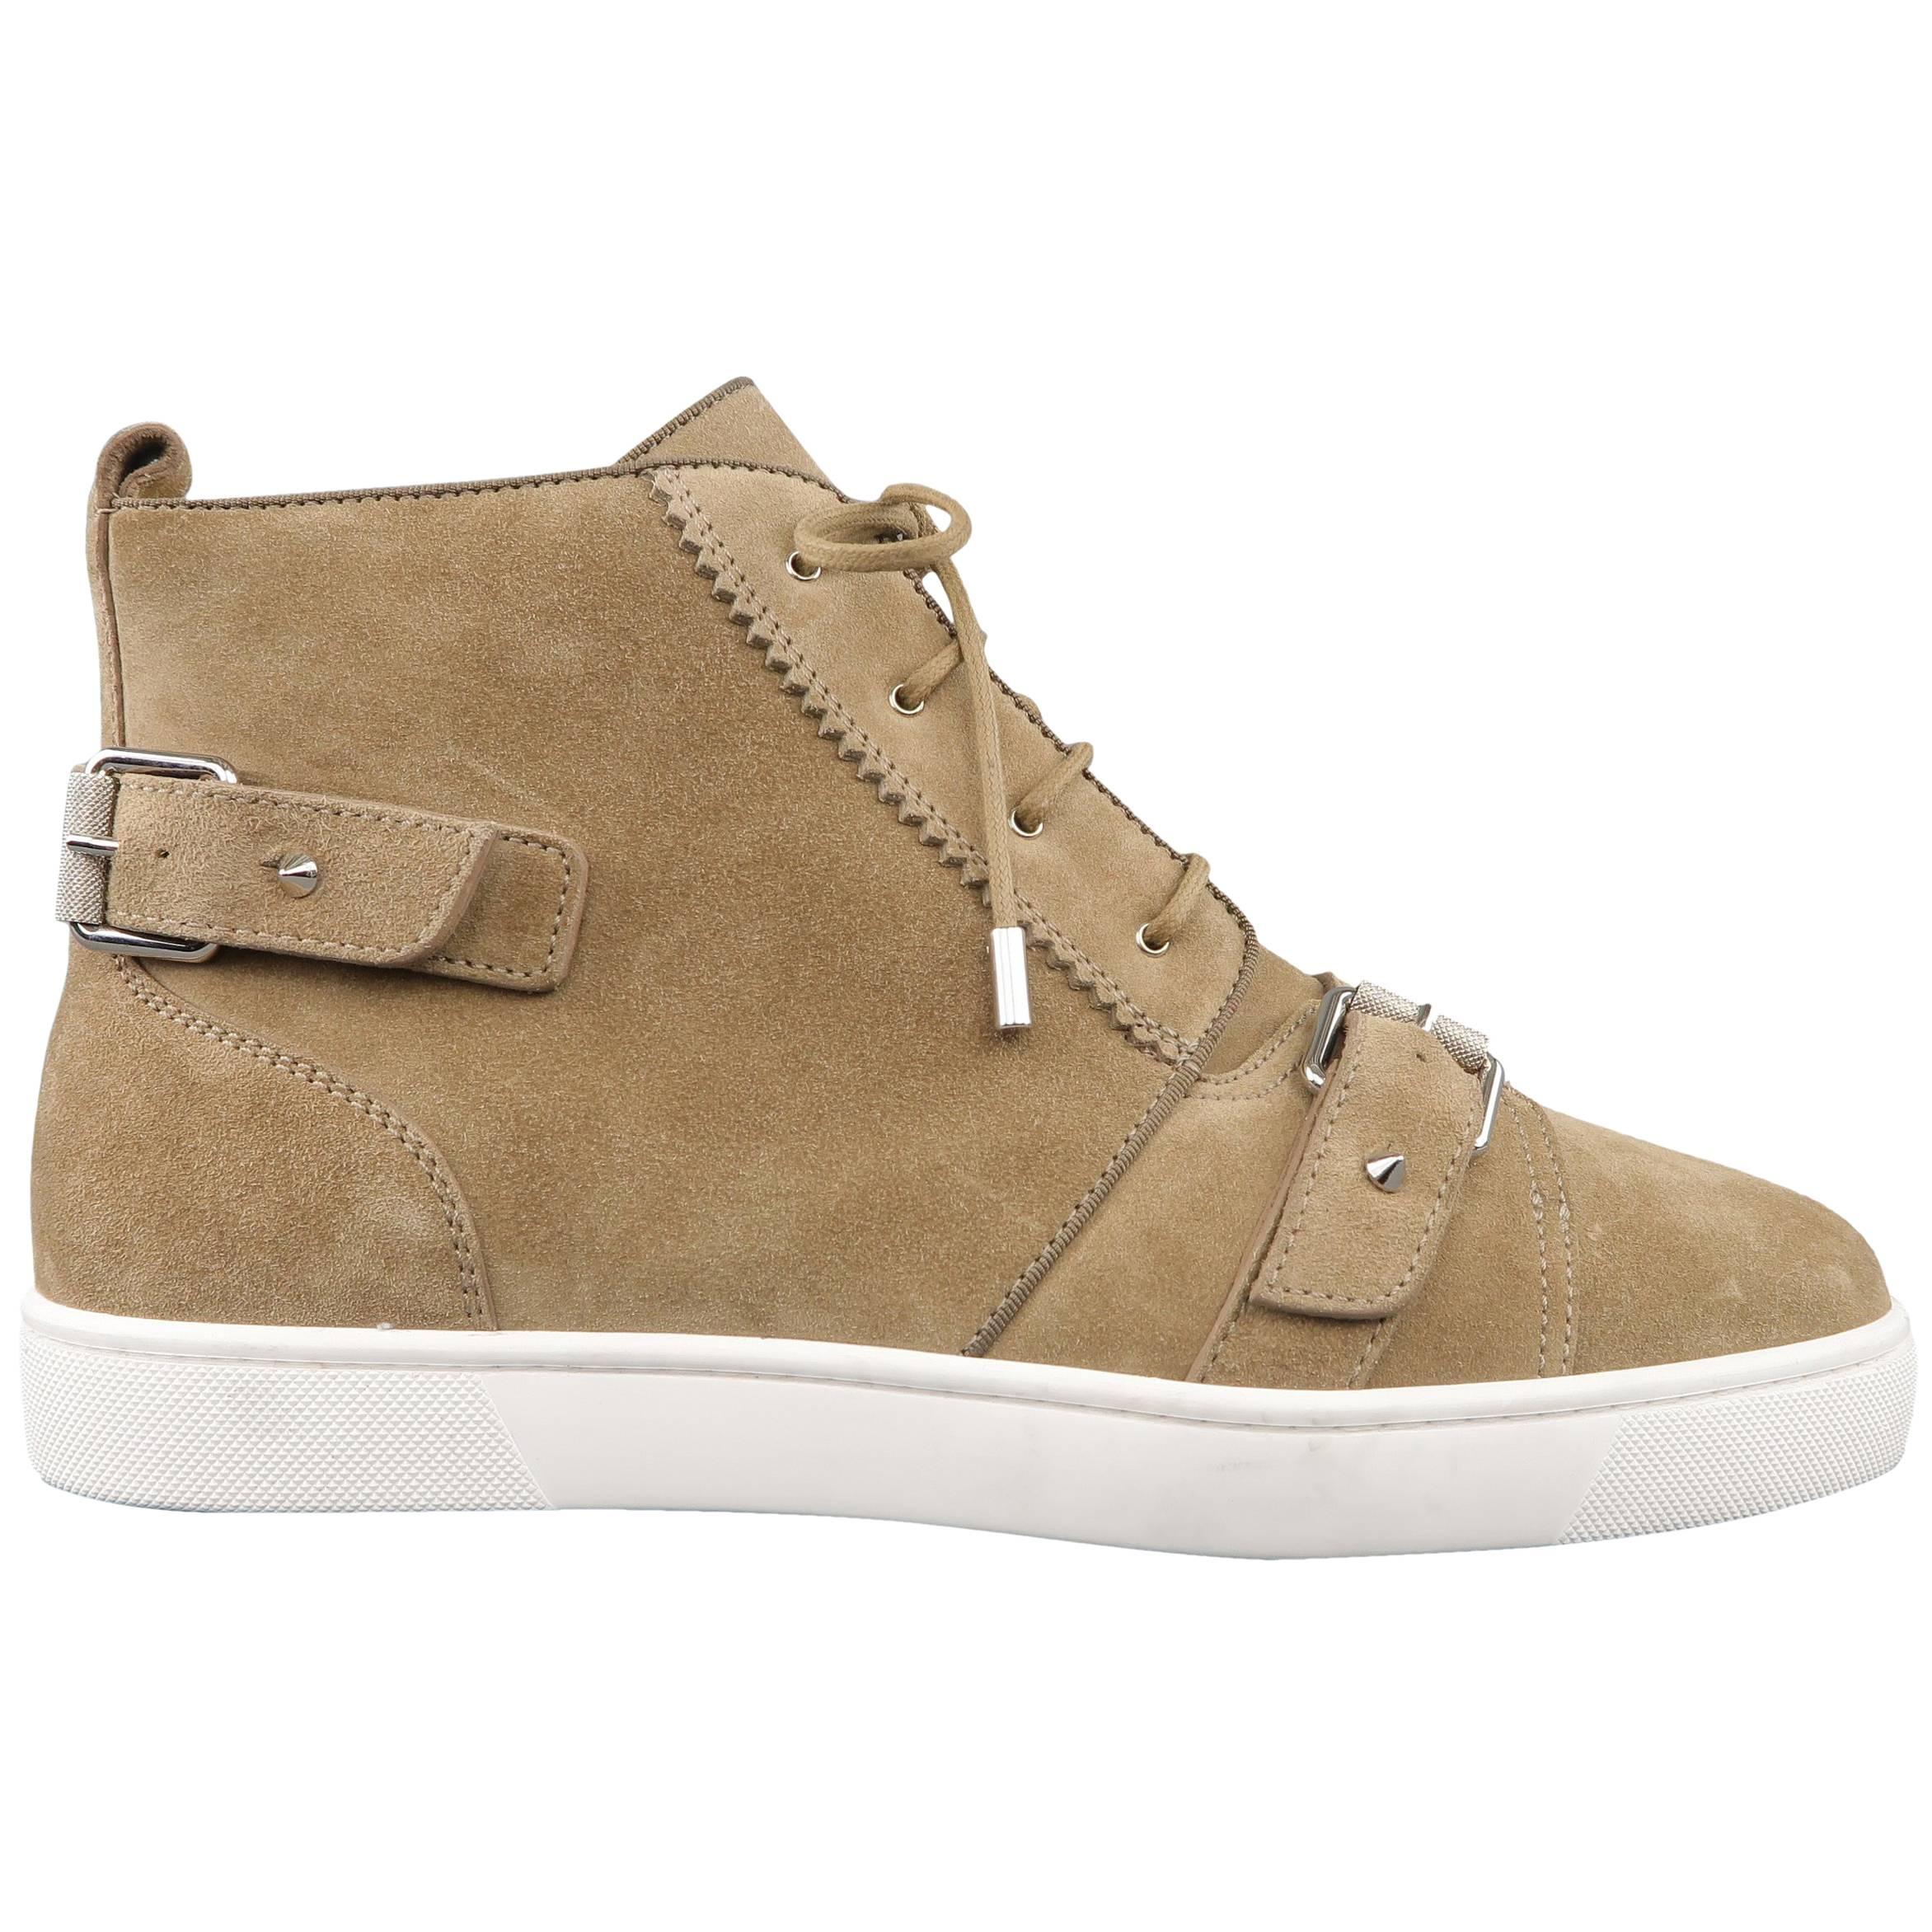 Men's CHRISTIAN LOUBOUTIN 11 Taupe Suede Buckle Strap NONO High Top Sneakers